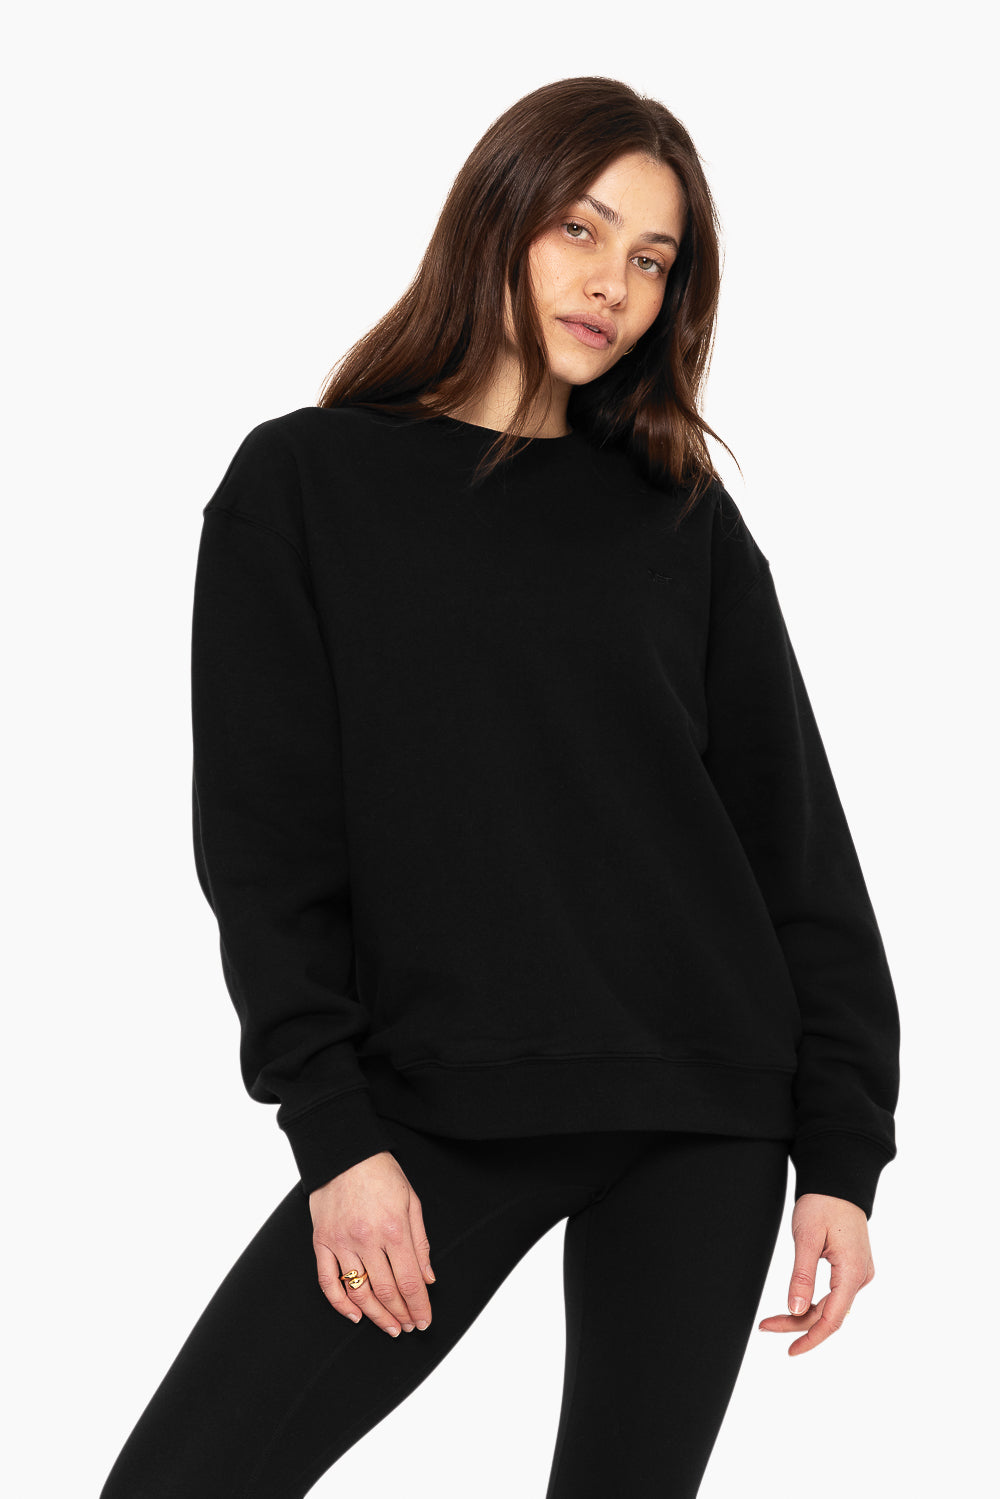 SET™ EMBROIDERED HEAVYWEIGHT SWEATS CREWNECK IN ONYX